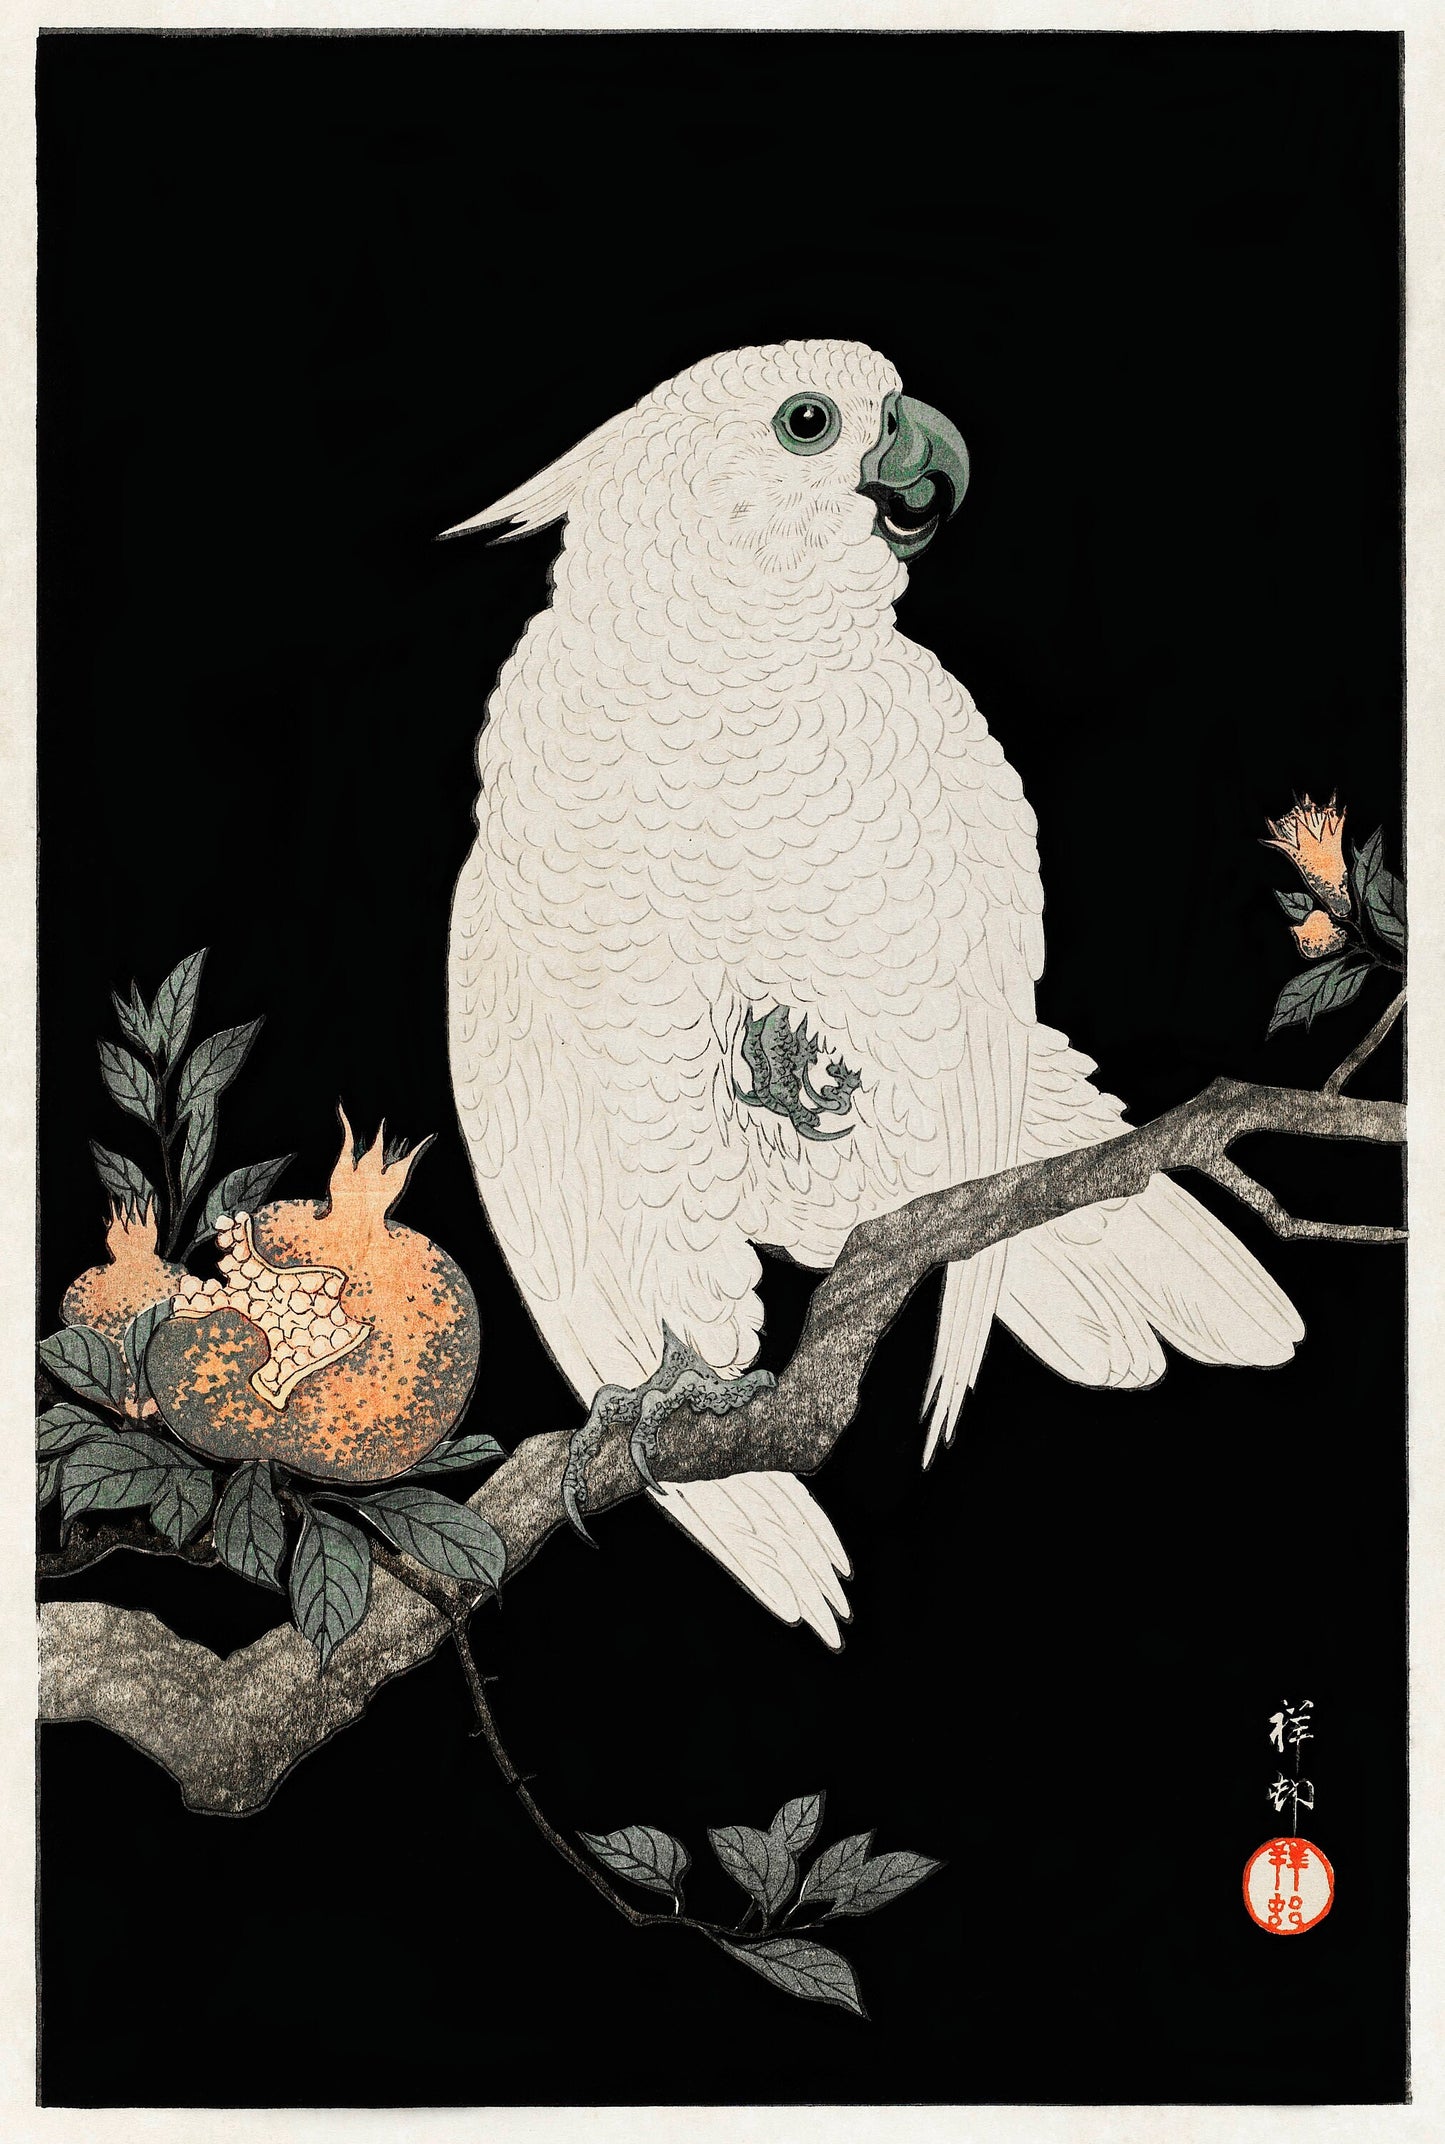 Cockatoo with pomegranate by Ohara Koson Japanese Art Print Poster Wall Hanging Decor A4 A3 A2